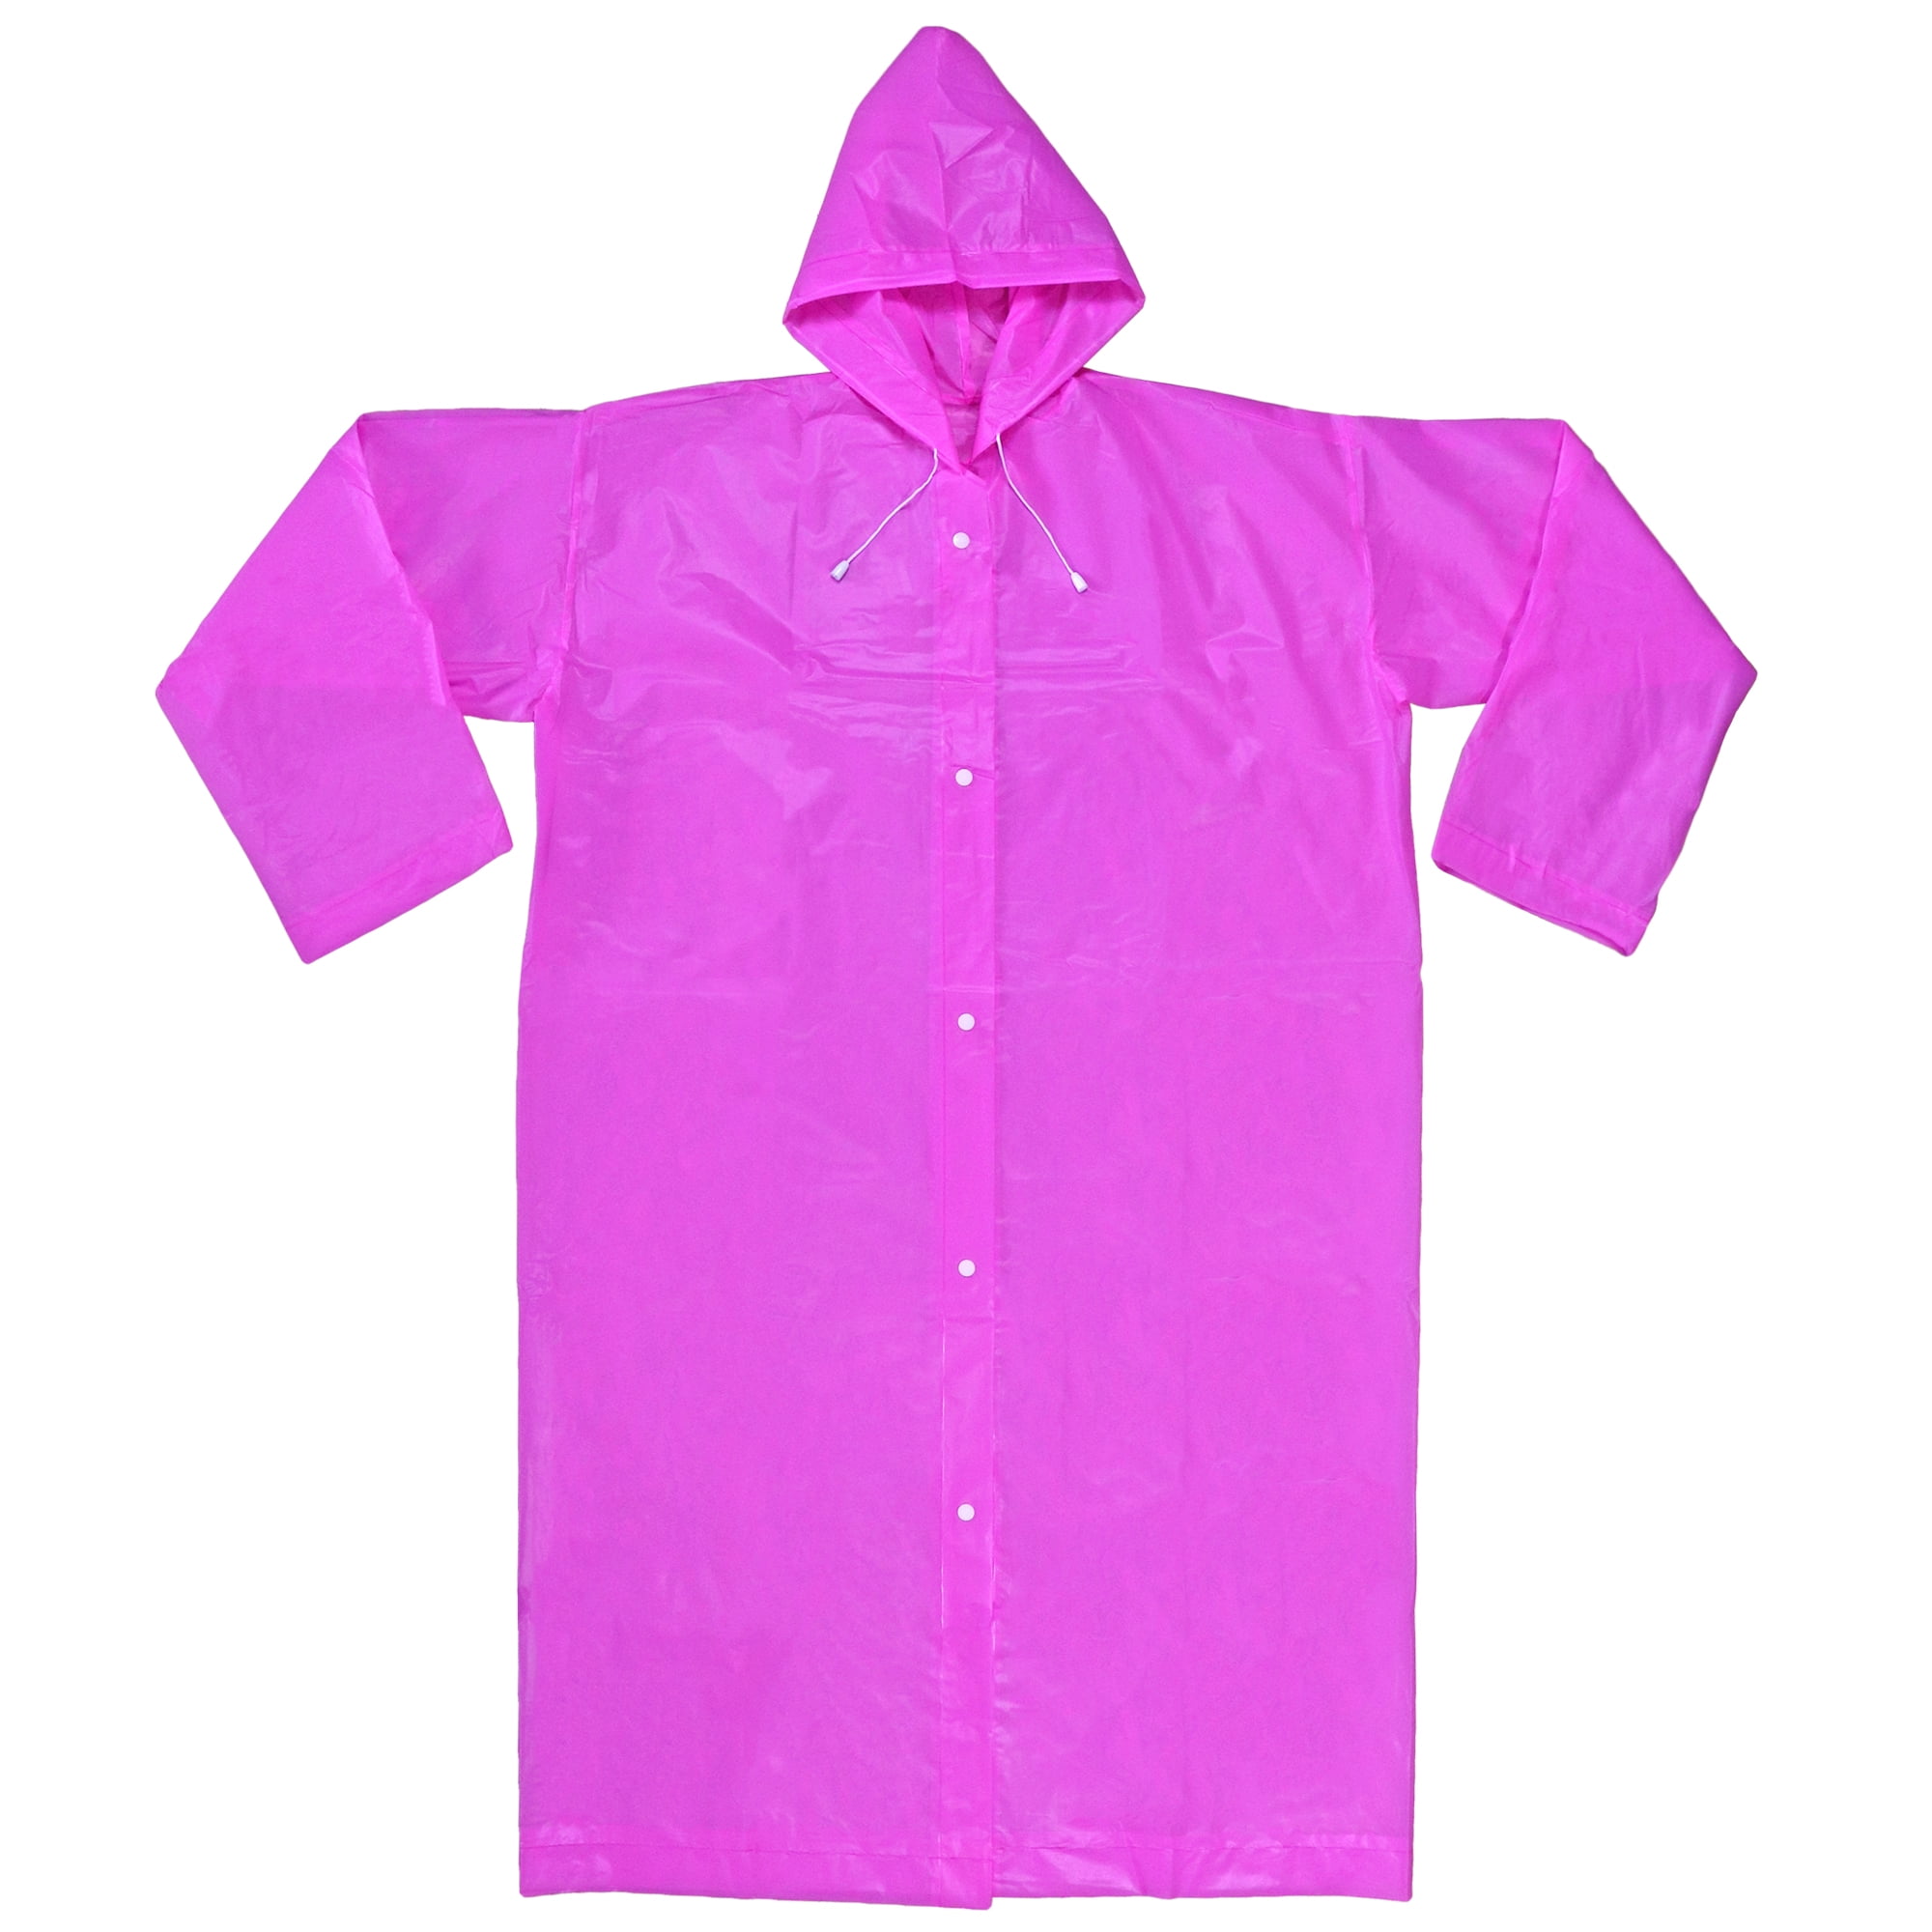 Non-Toxic EVA Portable Light Weight Poncho with Hood and Sleeves Reusable Raincoat for Adults 